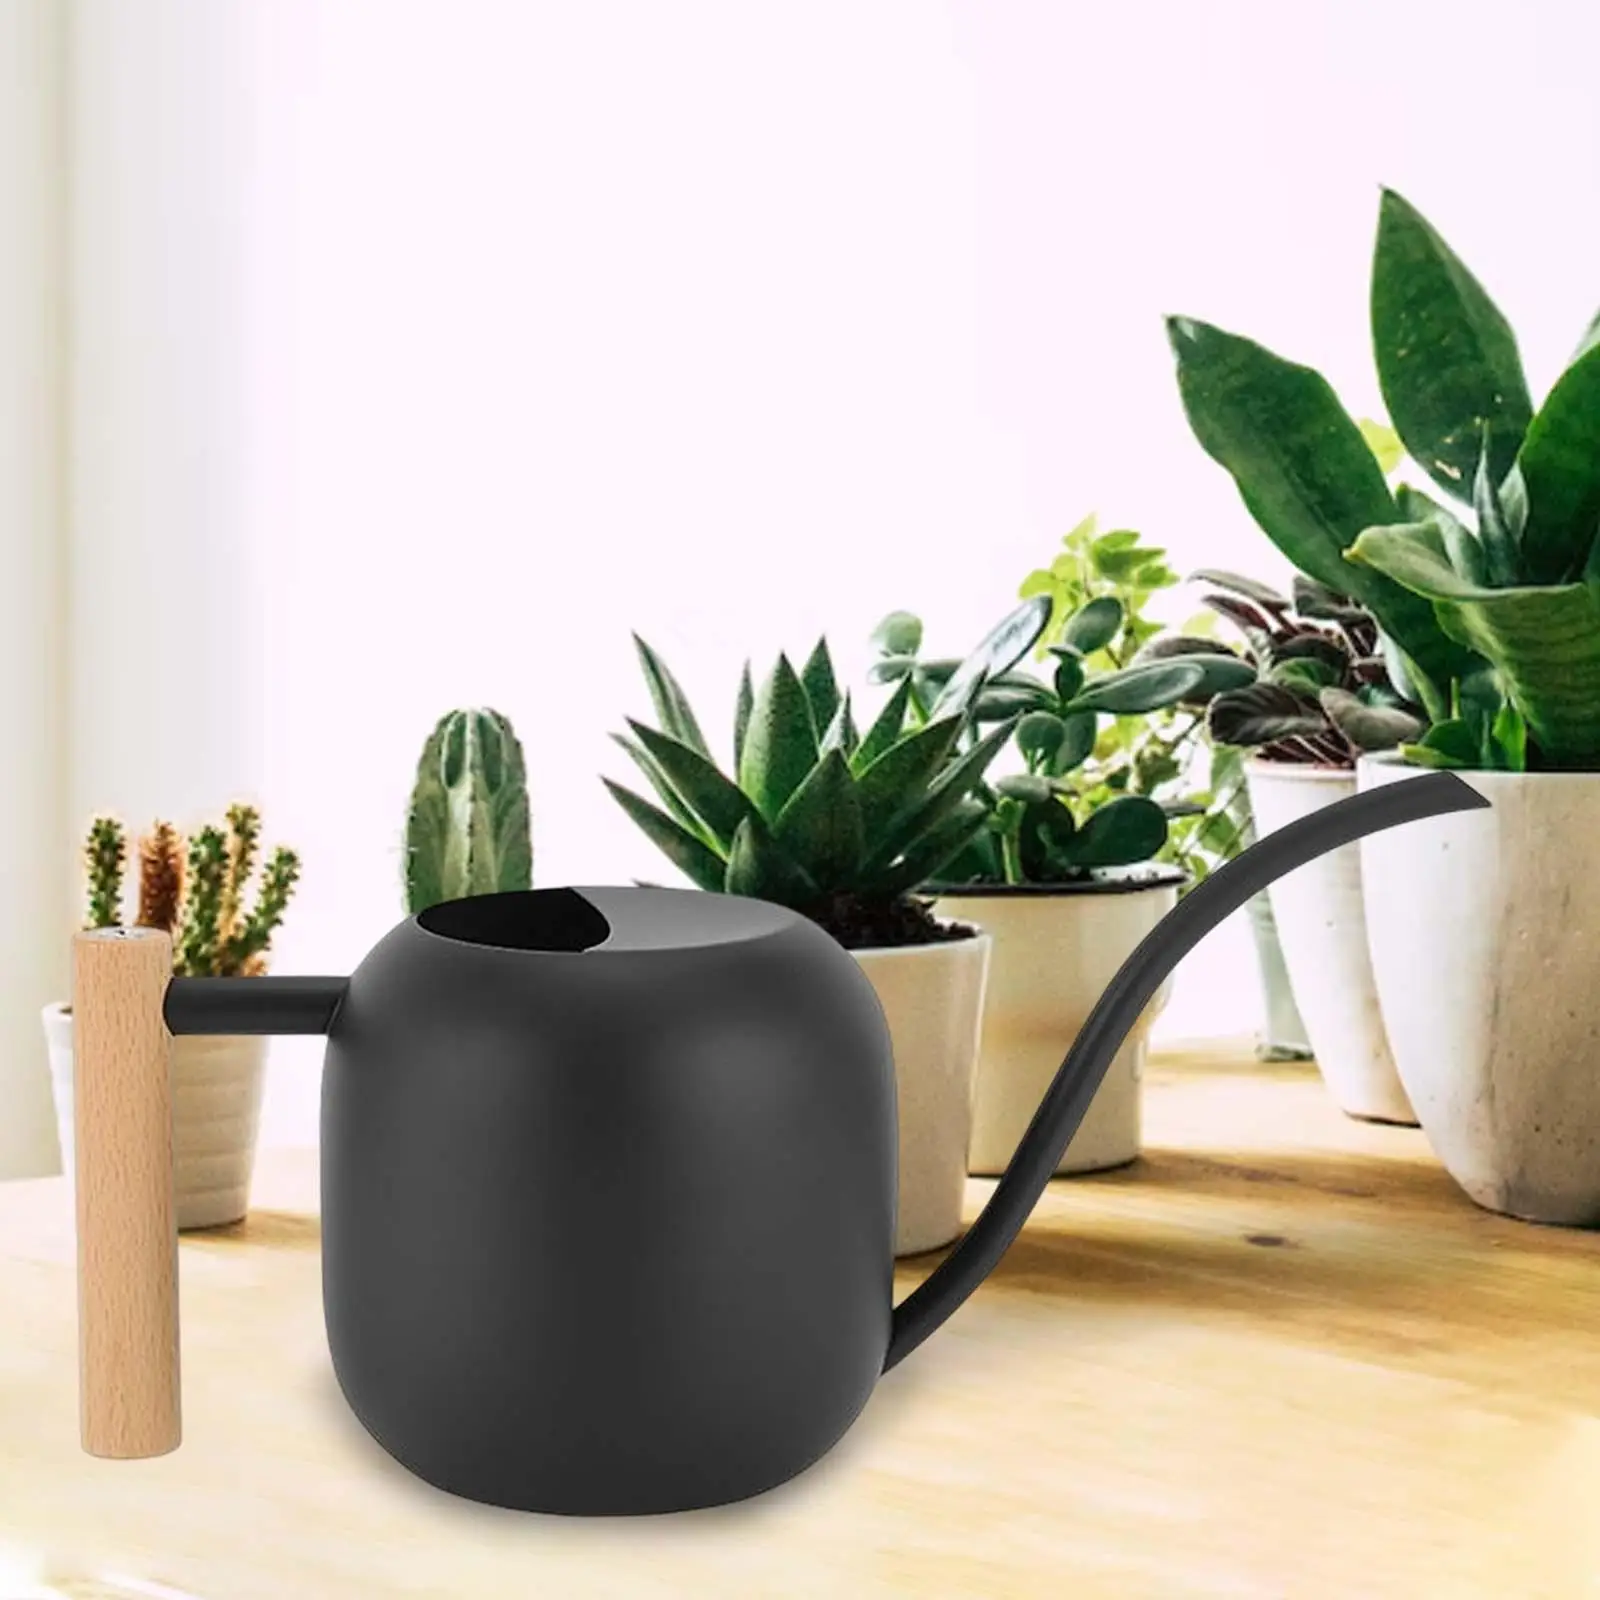 Mini Watering Can with Long Mouth Watering Flower Kettle for Bonsai Patio Outdoor Garden Decor